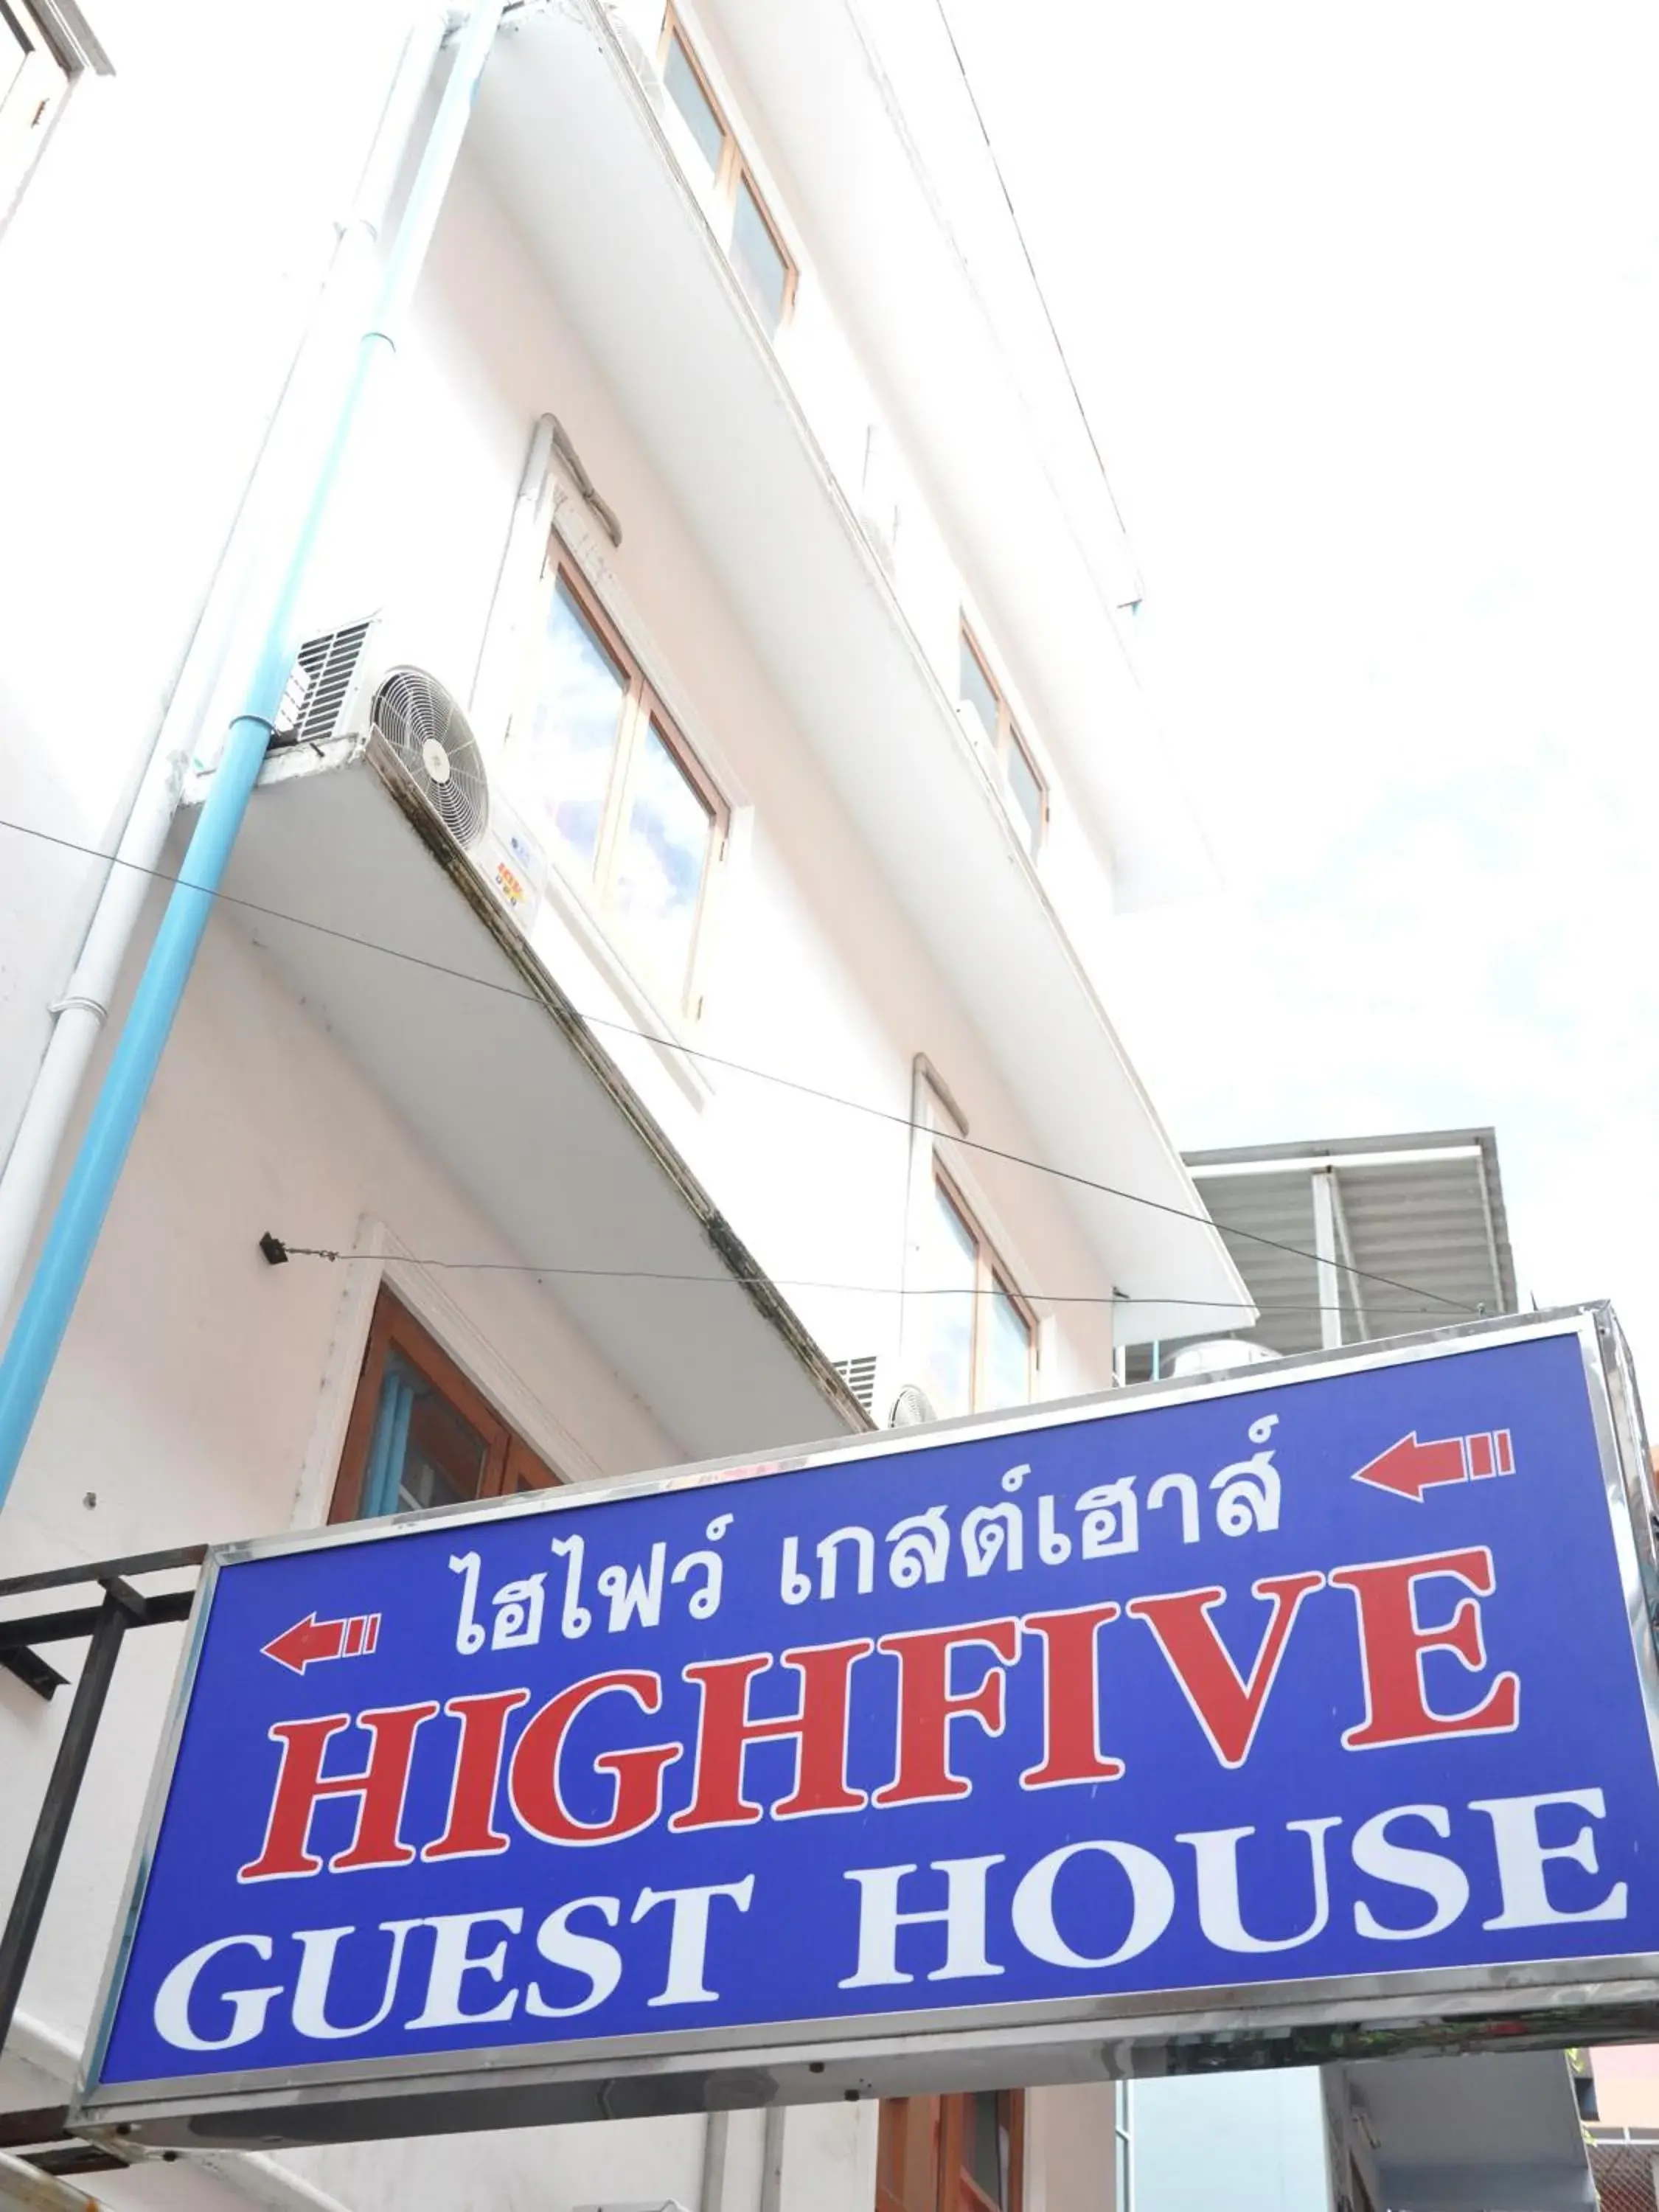 Highfive Guesthouse